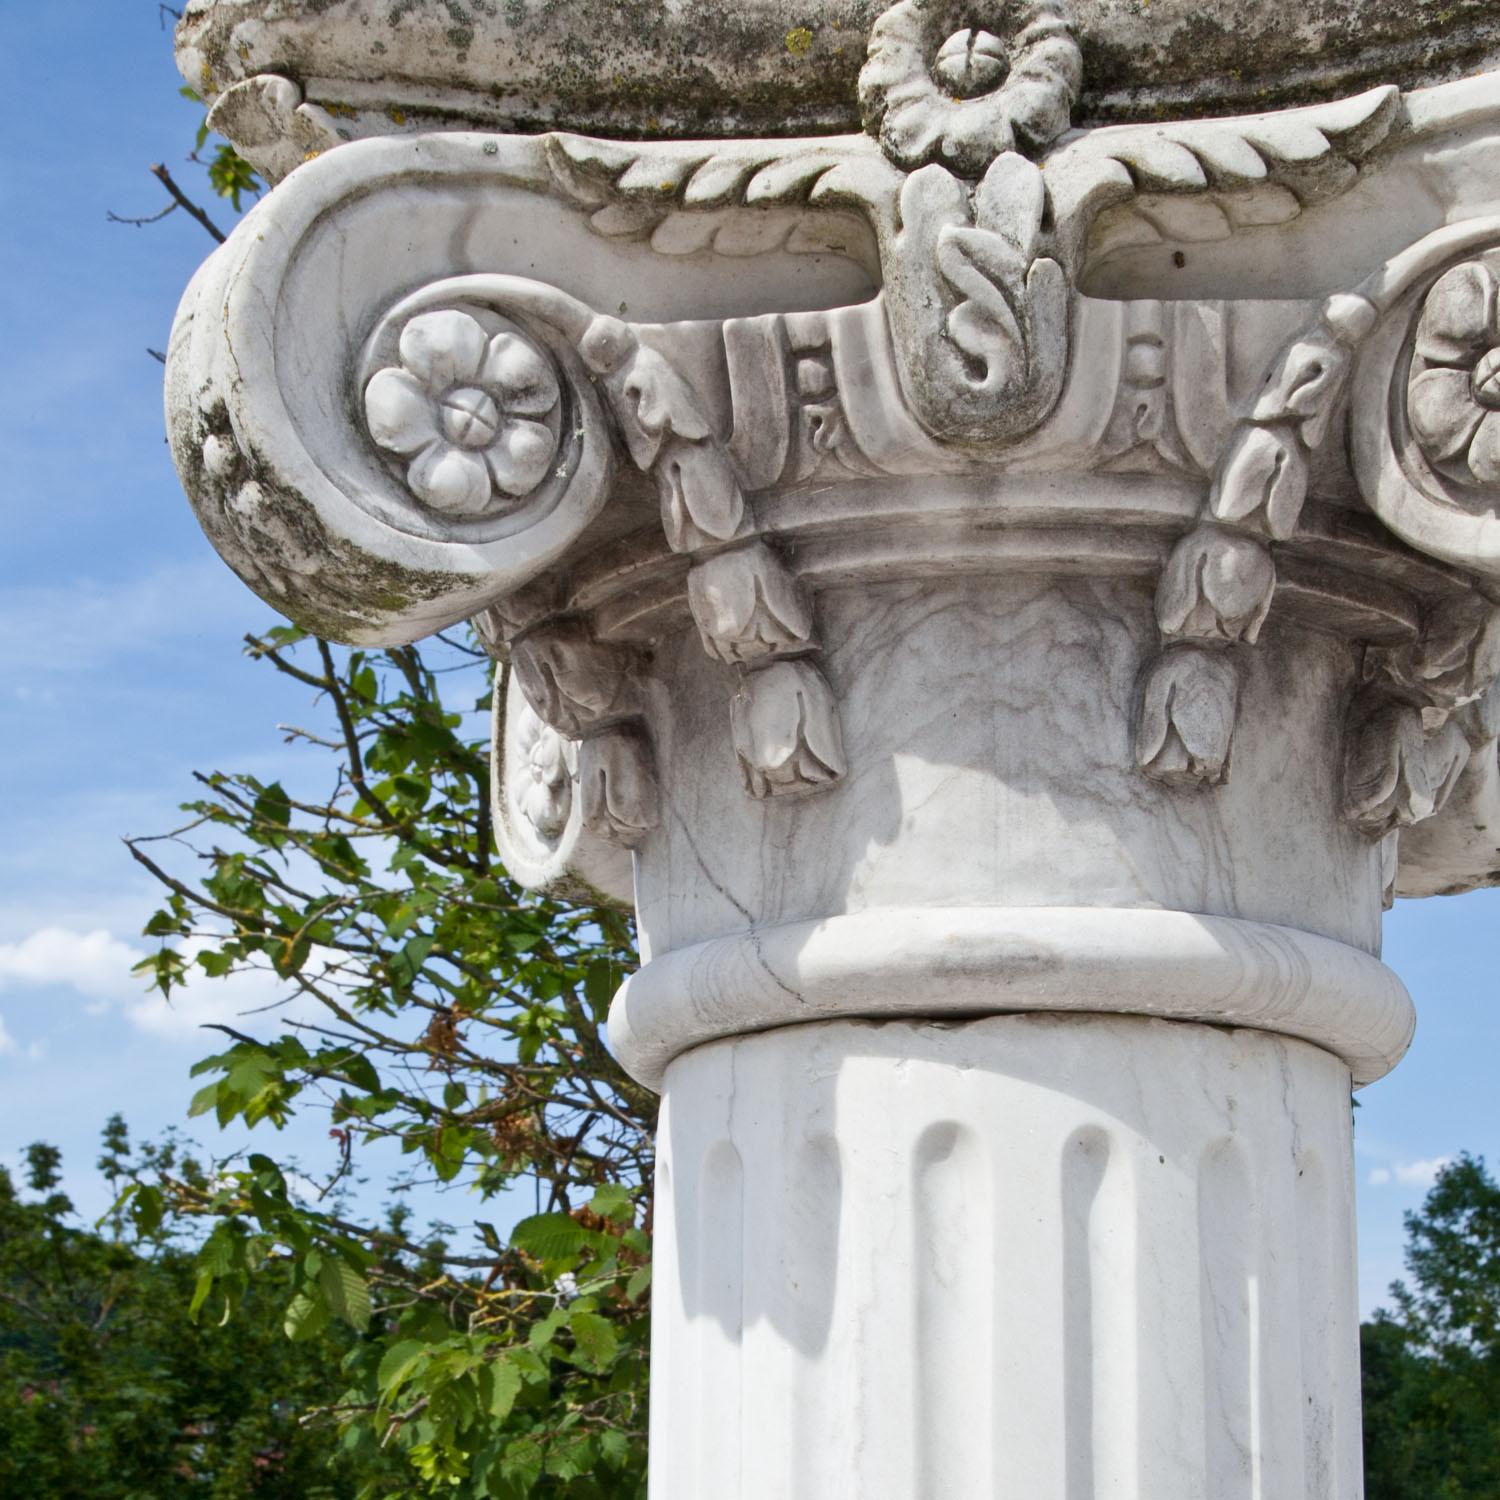 Tall column out of white marble and a naturally aged patina. The base is round, the shaft fluted and the capital with carved volutes and flower details.